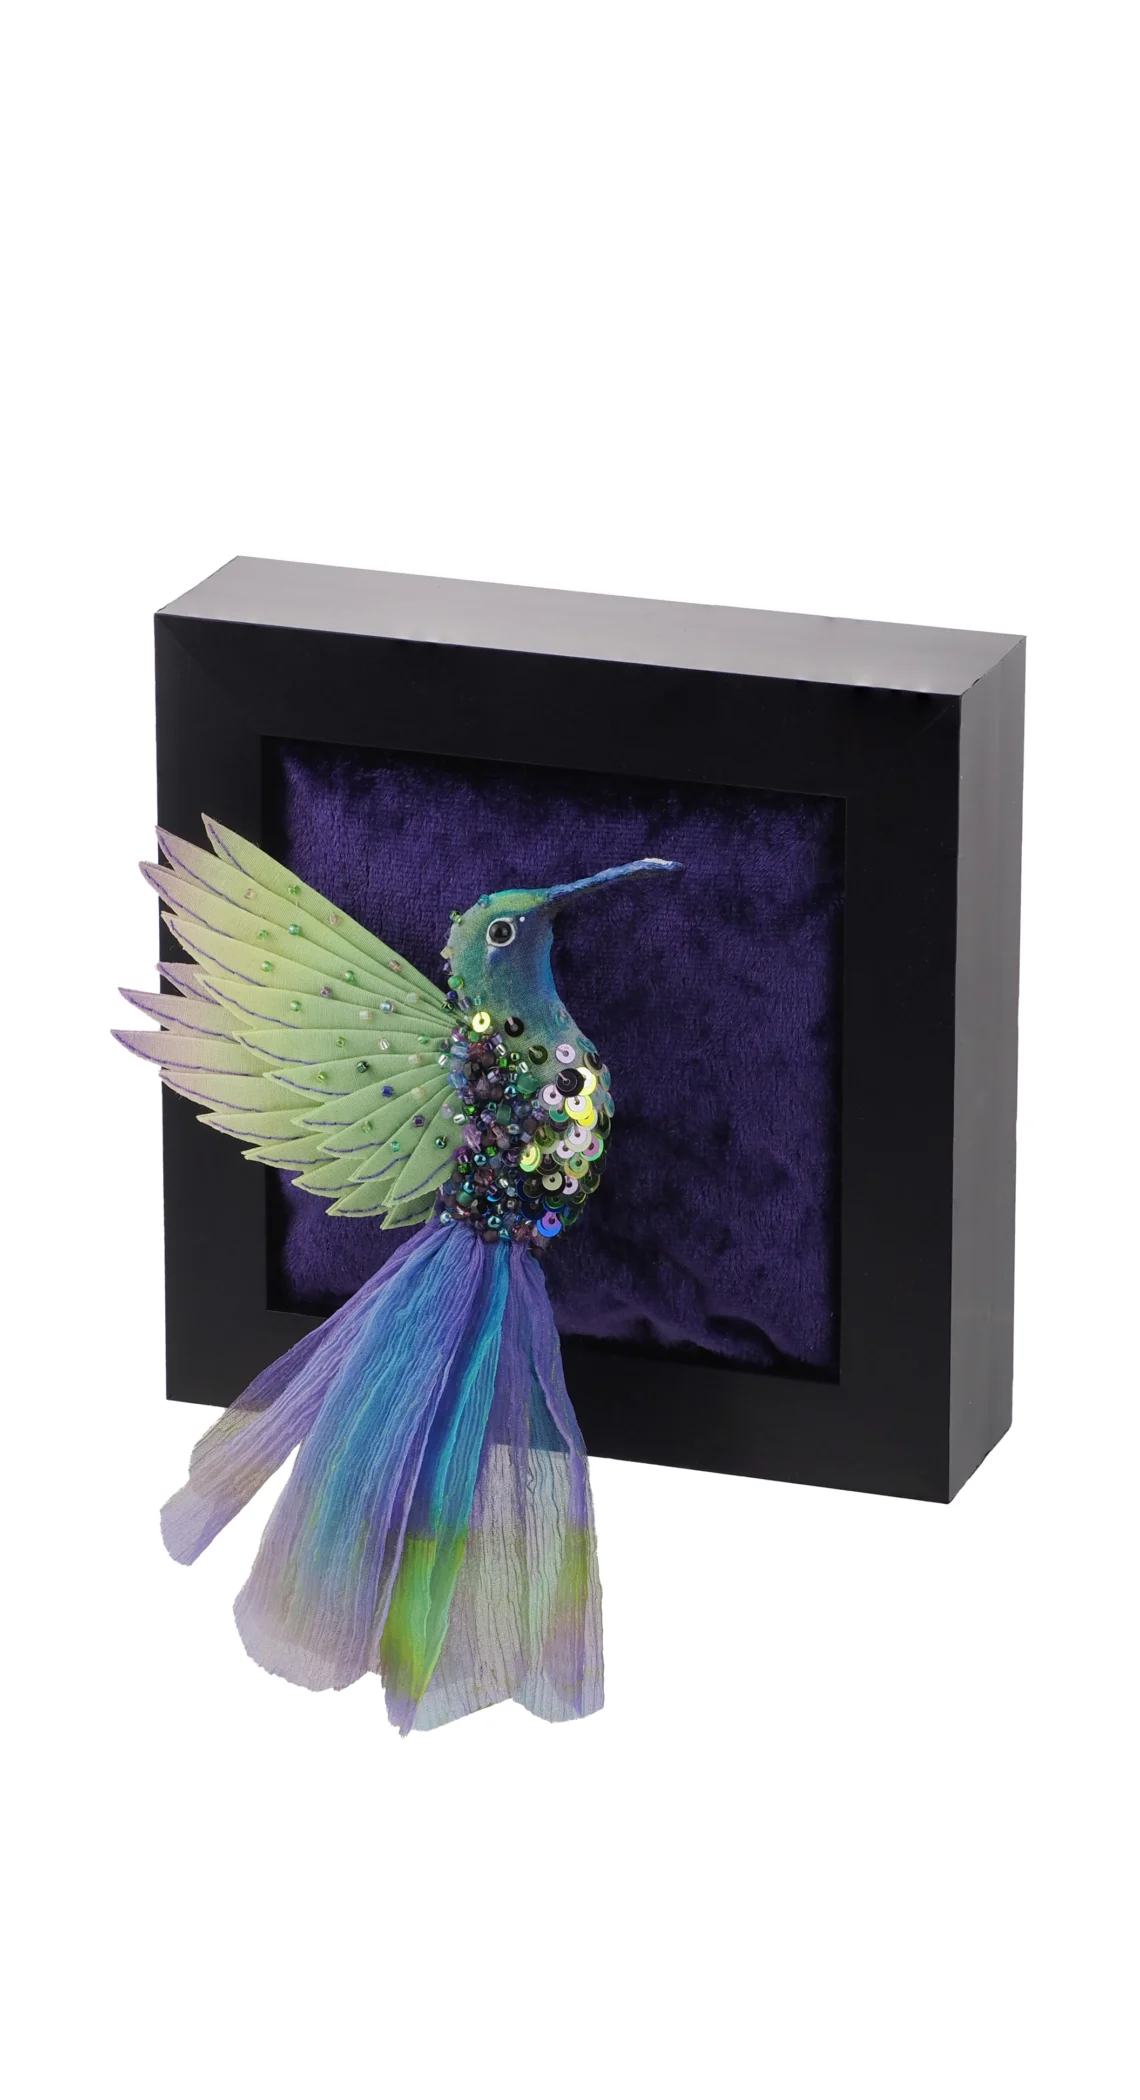 Flying Hummingbird Textile Wall Panel and Brooch Forest Green and Purple - handcrafted in the UK hummingbird art